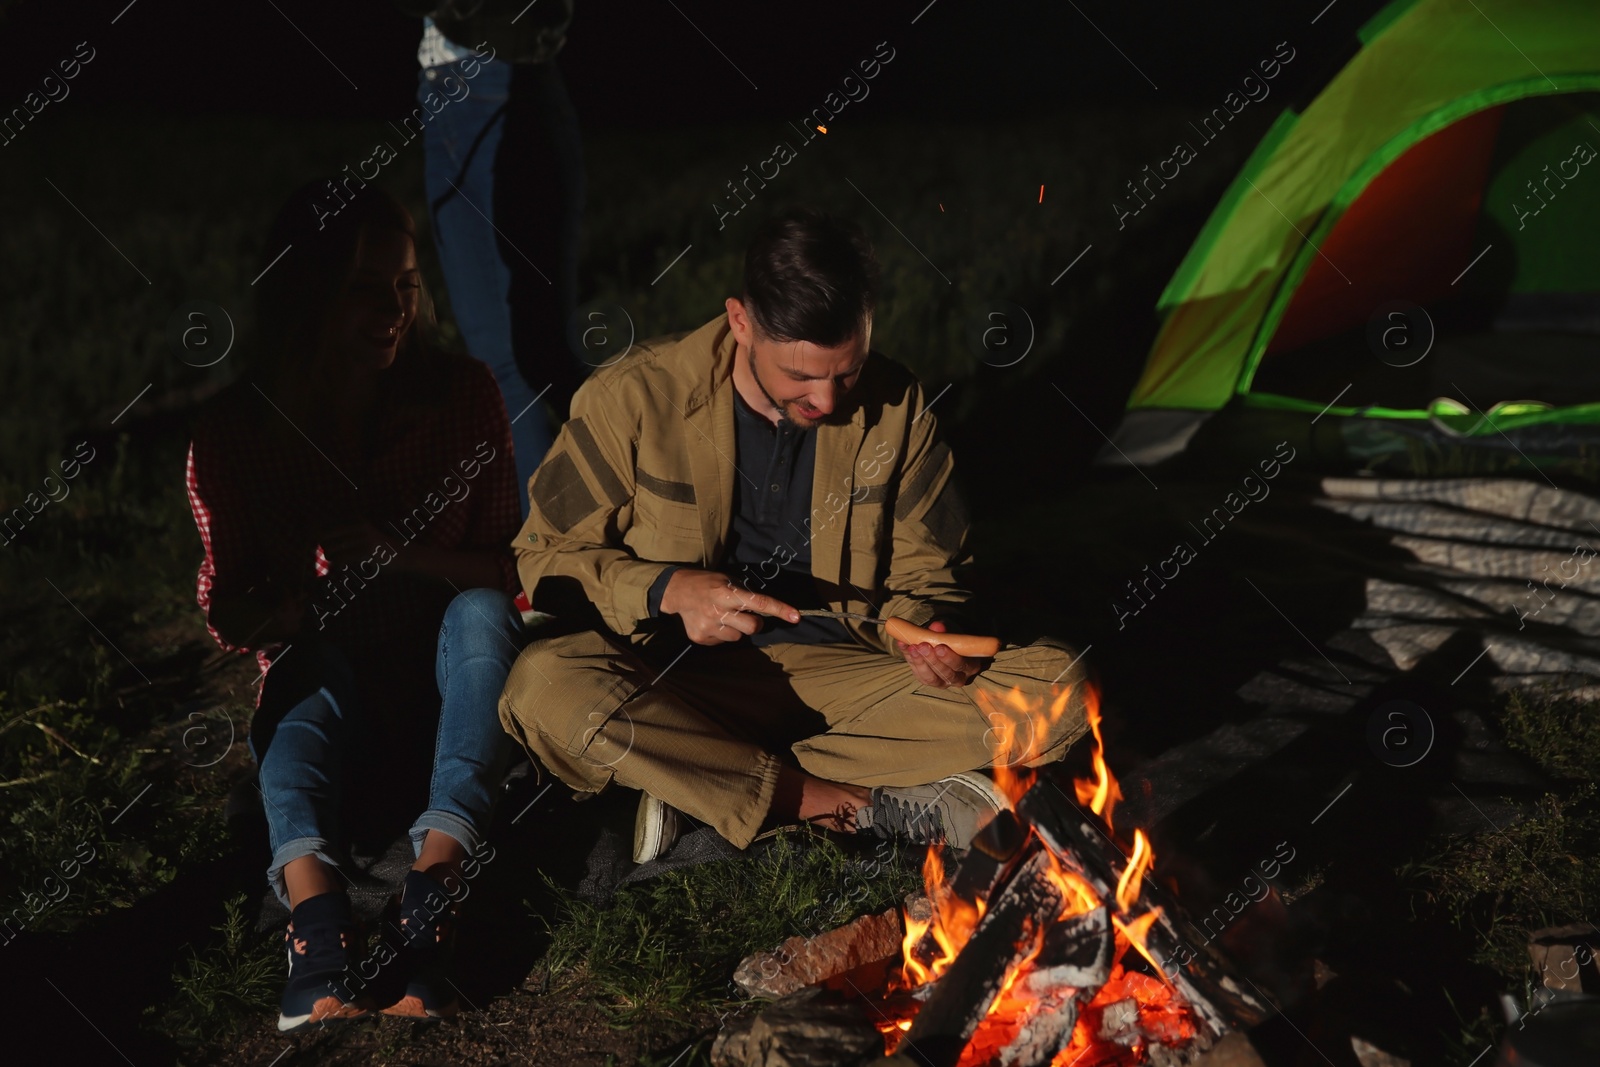 Photo of Young friends spending time near bonfire at night. Camping season